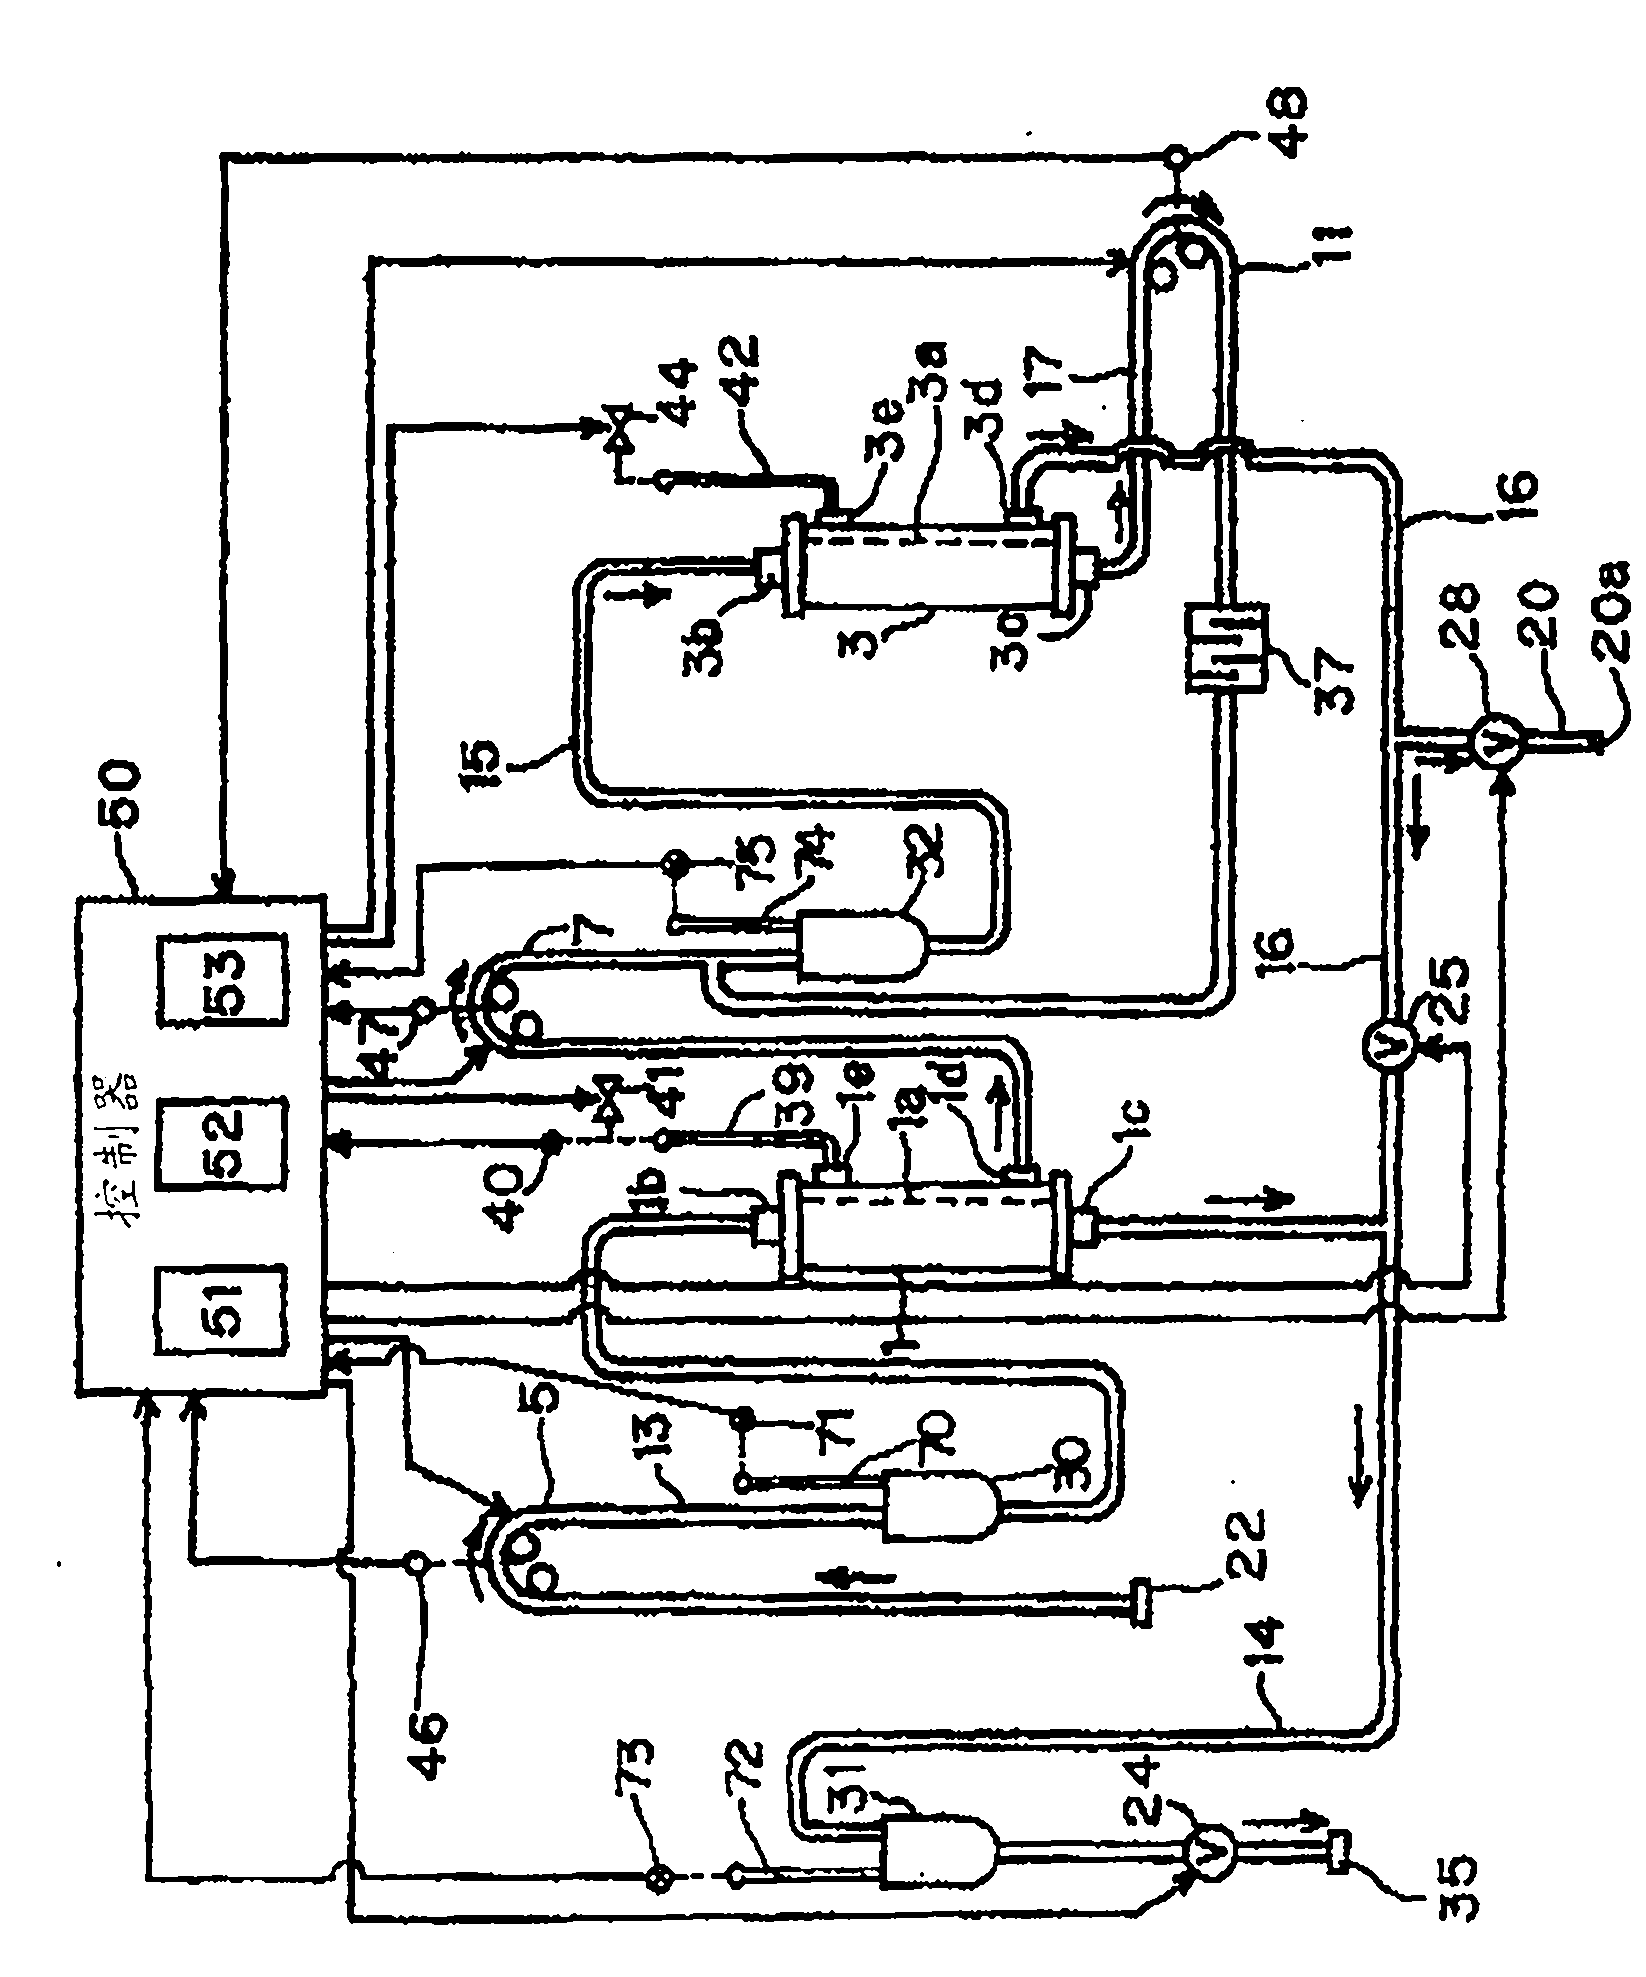 Double filtration blood purification apparatus and method of priming therefor